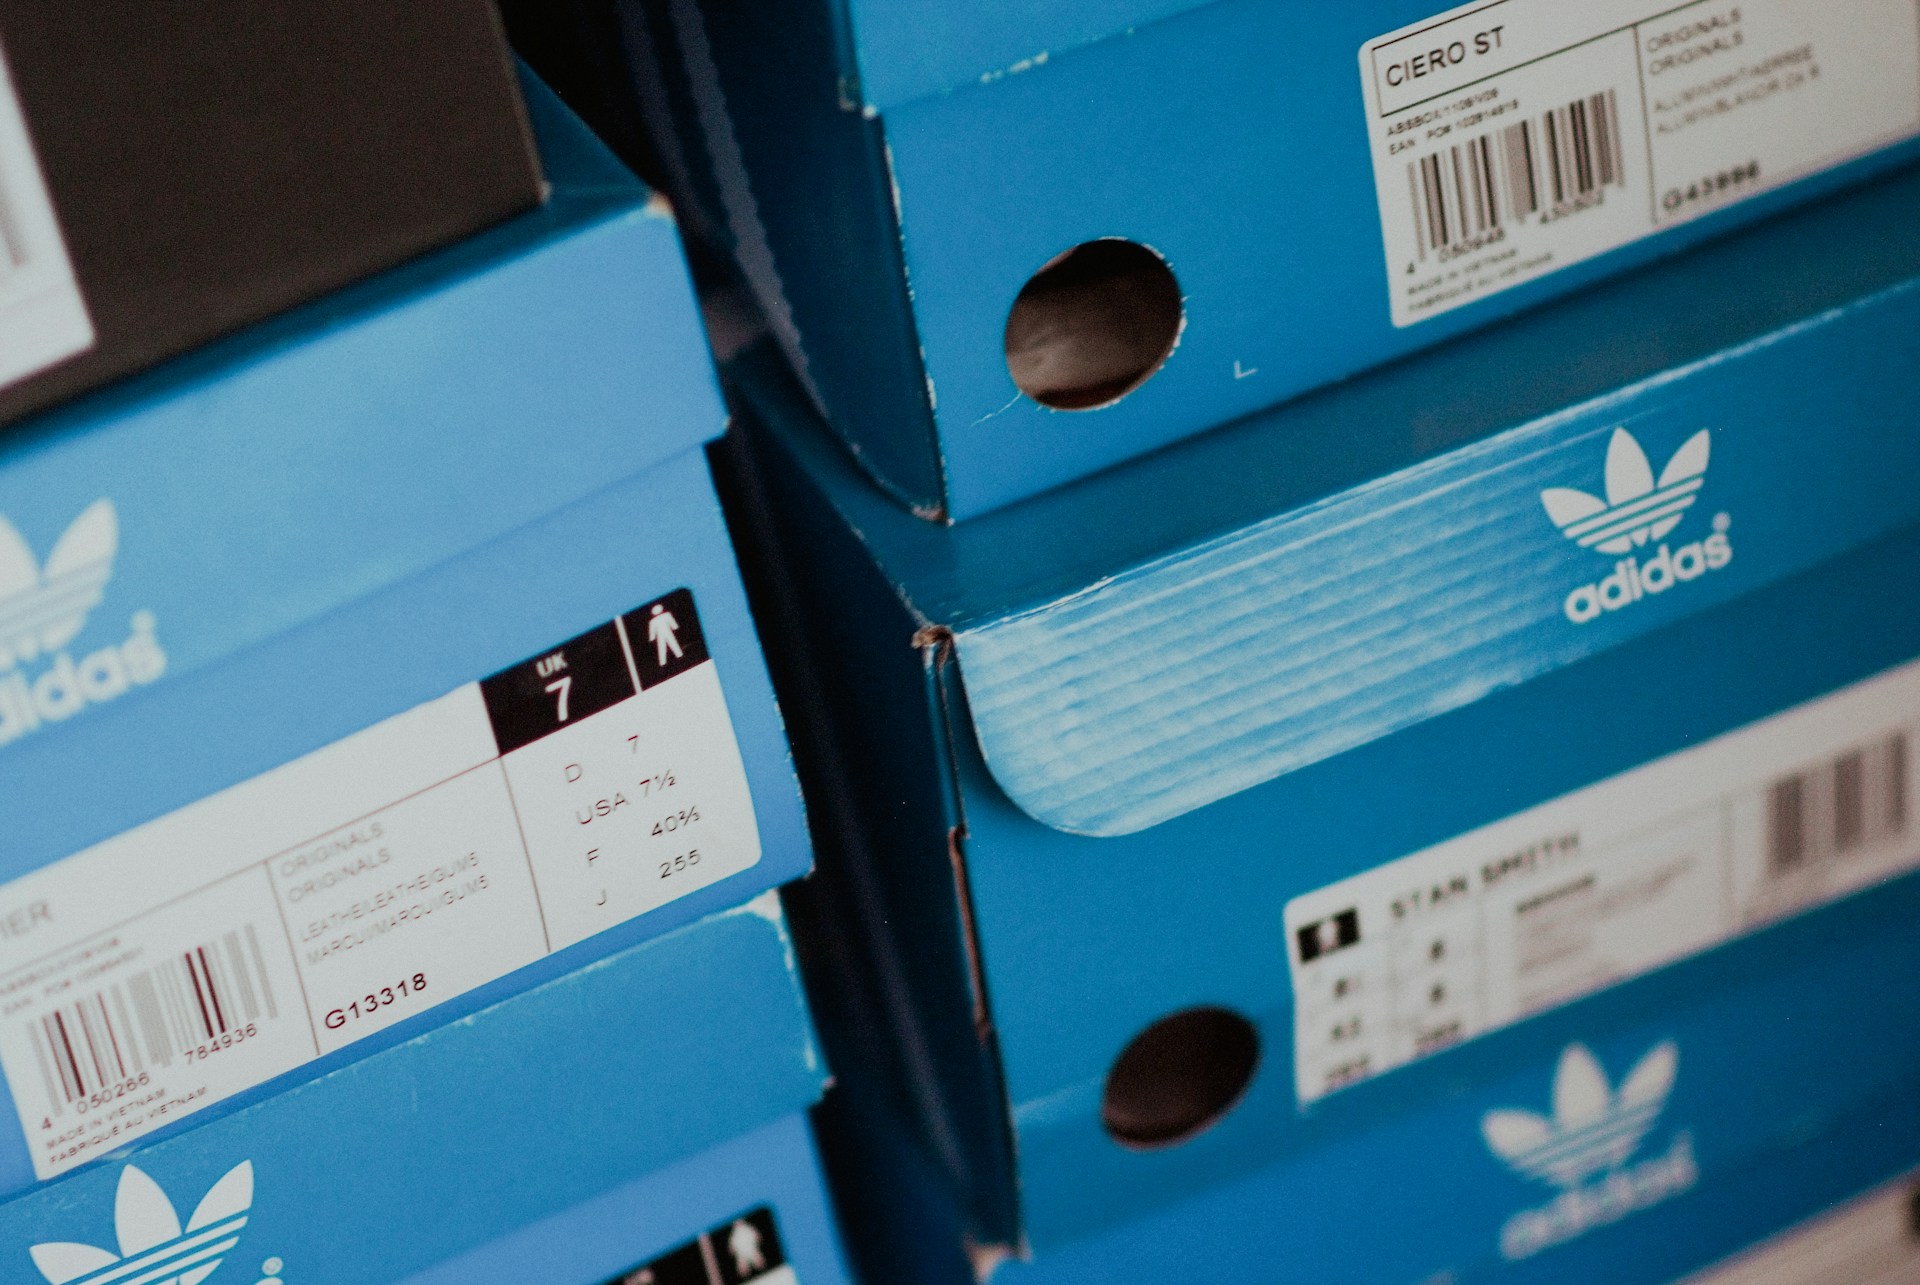 Blue and white Adidas shoe boxes